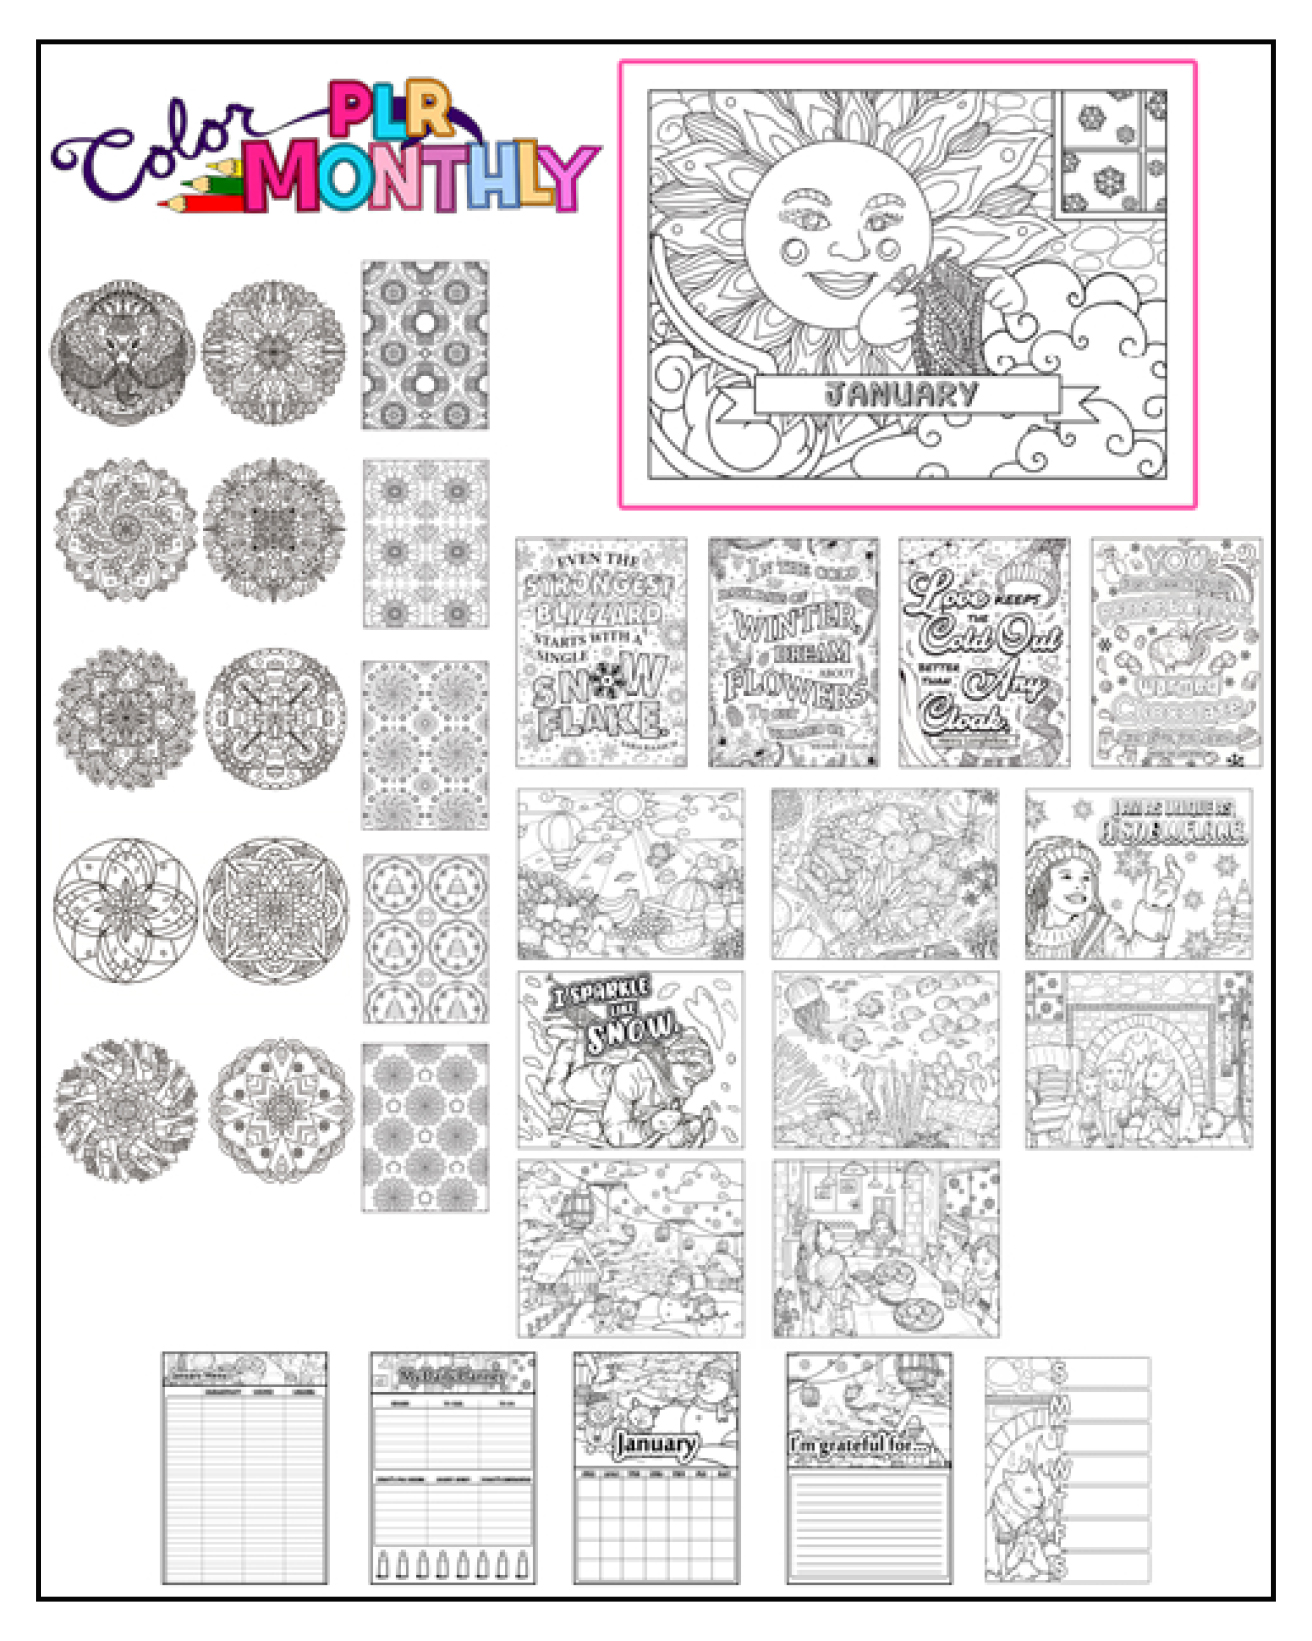 a complete image showing smaller images of all the coloring pages in a package about snow and winter with mandalas